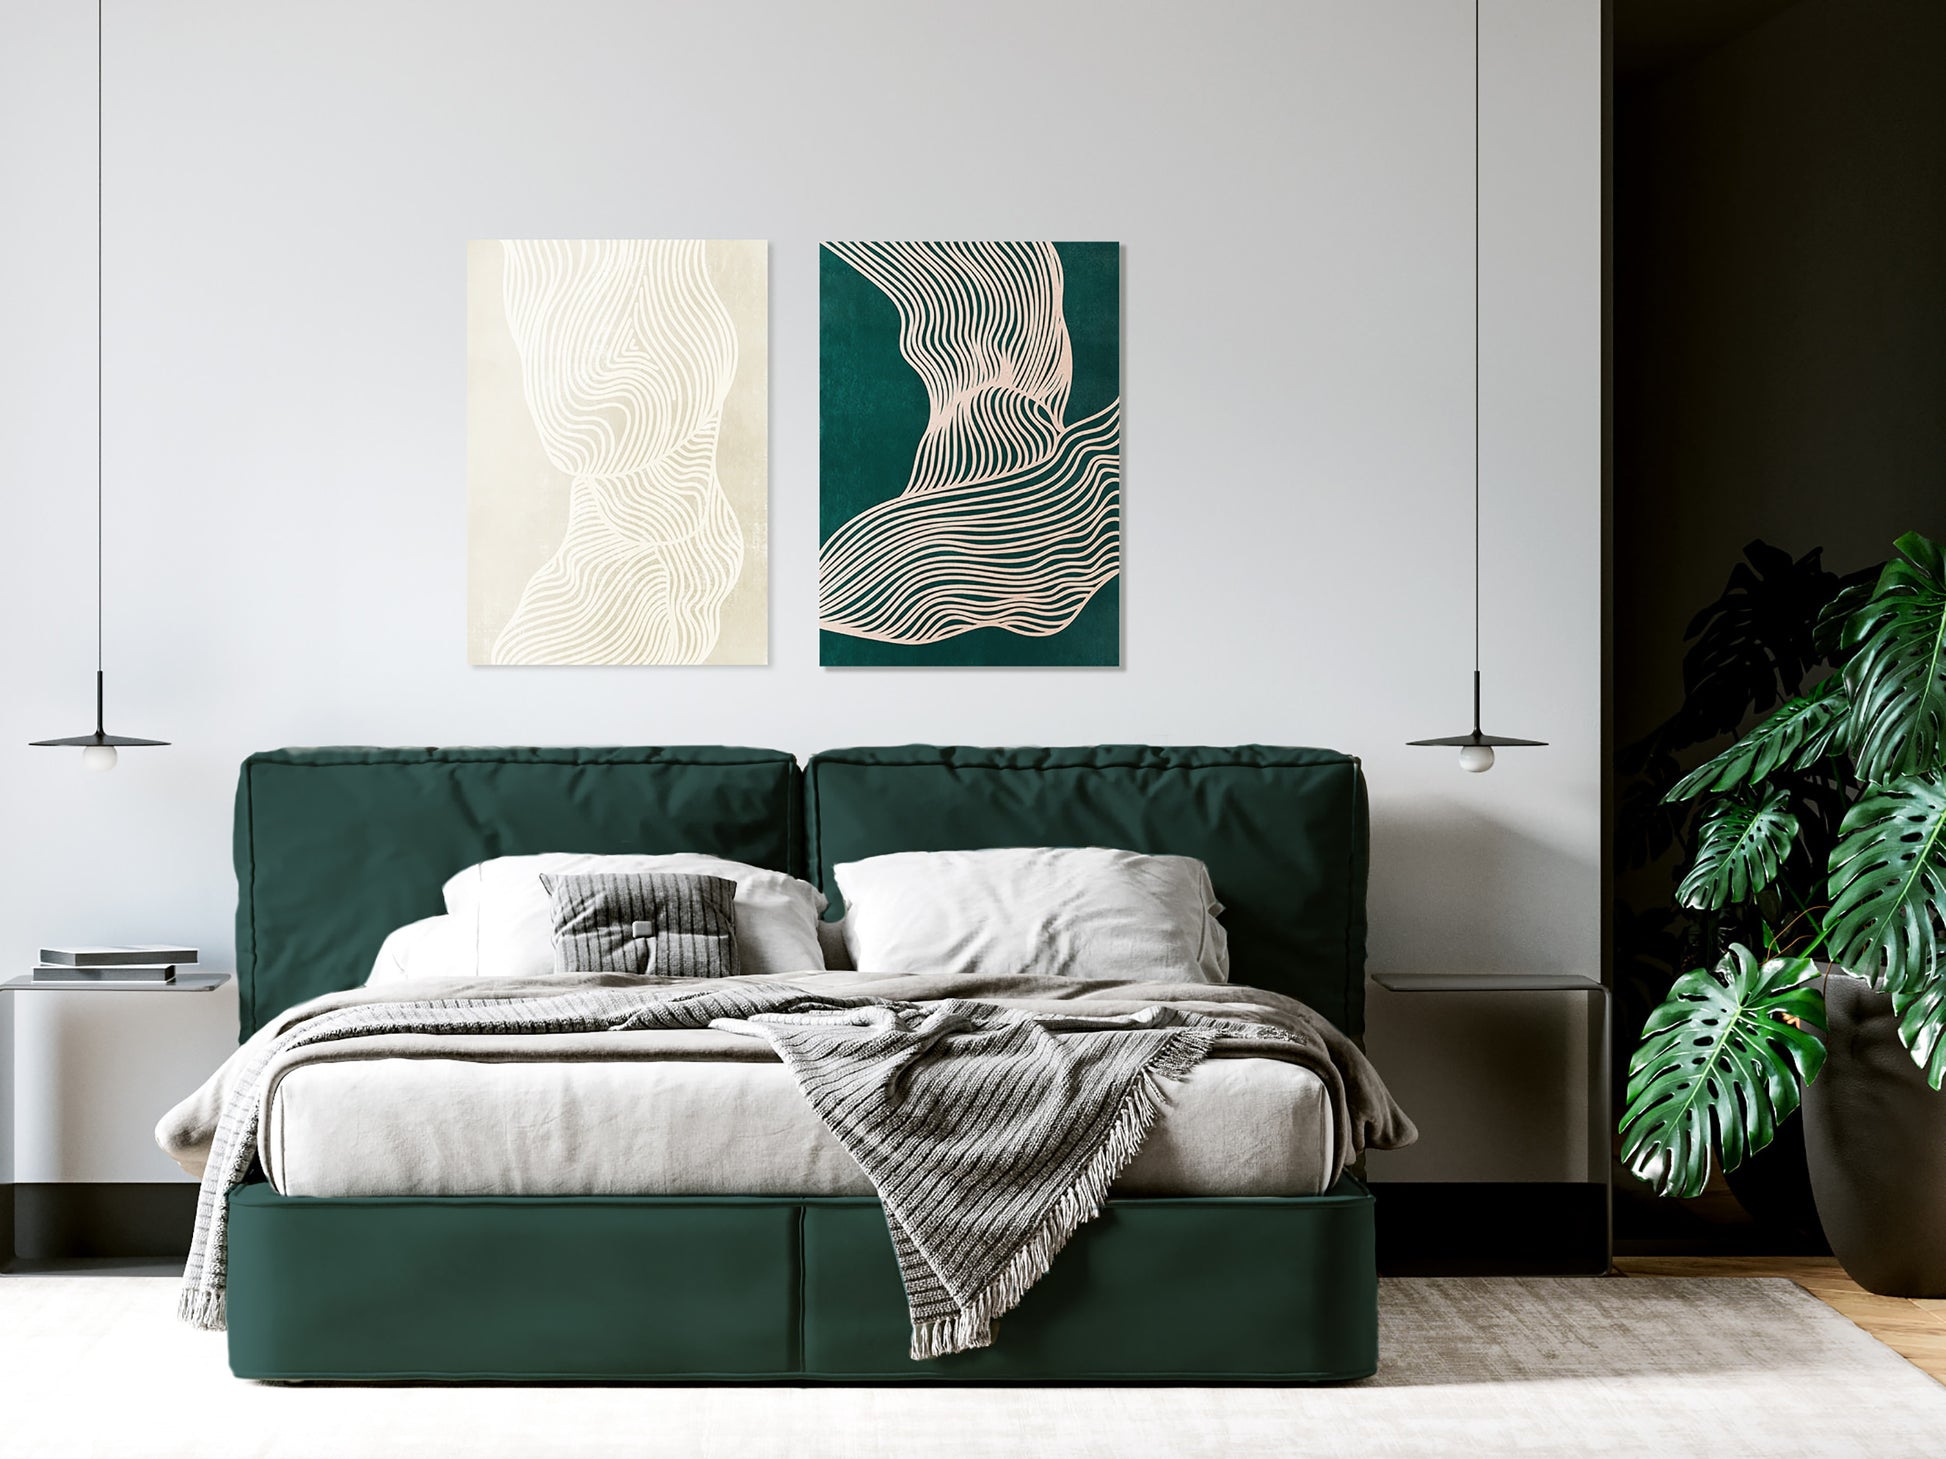 Extra large wall art	Printable wall art	Trendy emerald green	Beige abstract line	Art poster	Bedroom wall decor	Living room wall art	INSTANT DOWNLOAD	Neutral boho art	Modern decoration	Minimalist poster	Geometric abstract	Abstract lines